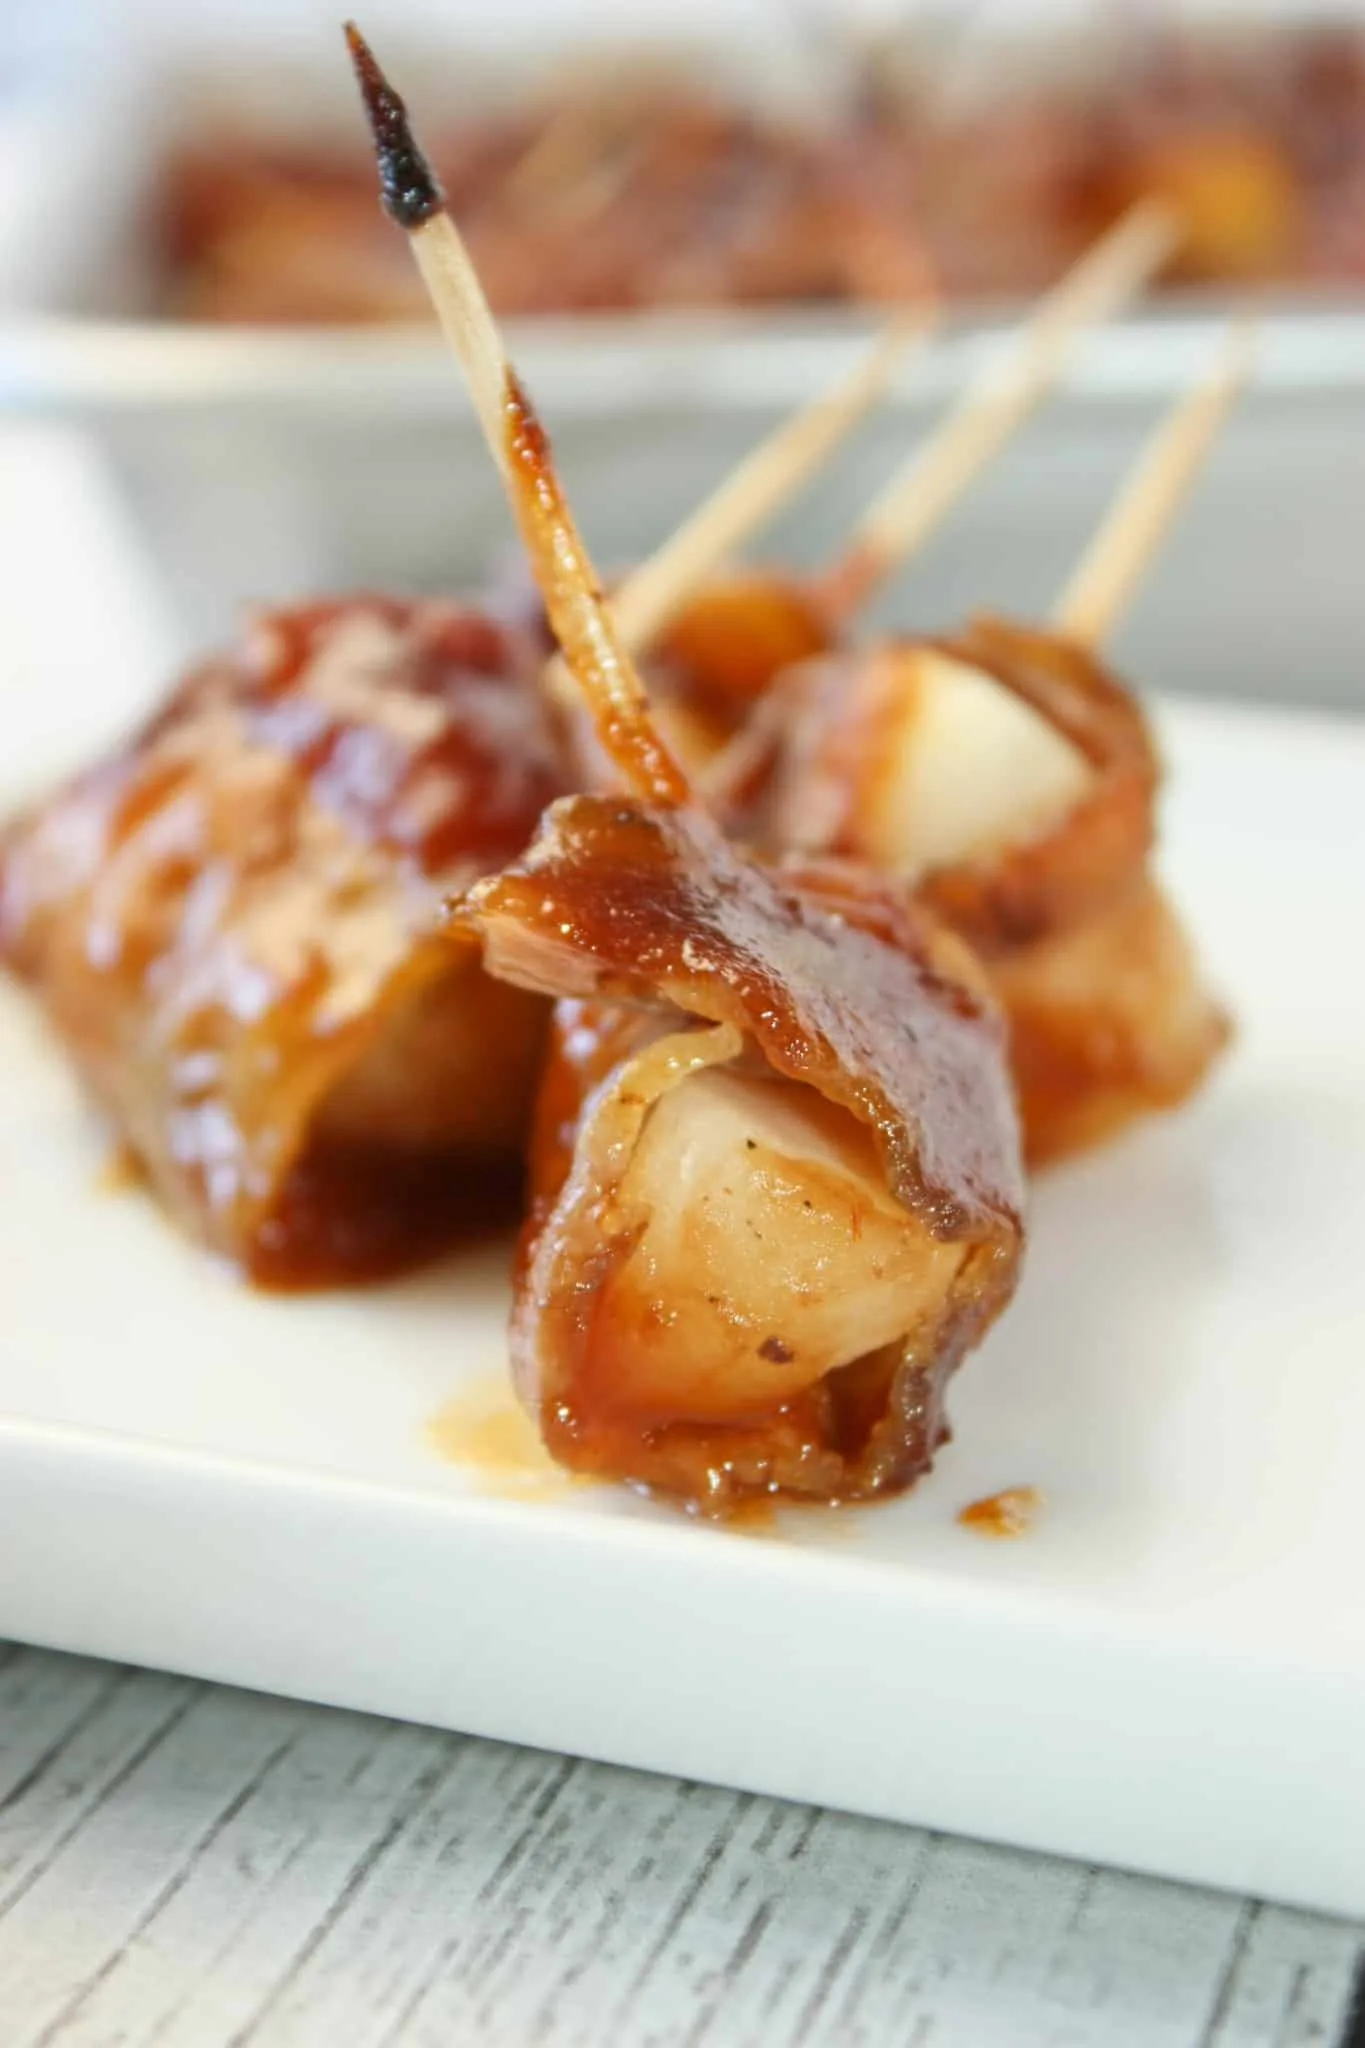 Bacon Wrapped Water Chestnuts are an easy and tasty appetizer to make.  Use a few staple items to create a savoury sauce and use some gluten free bacon.